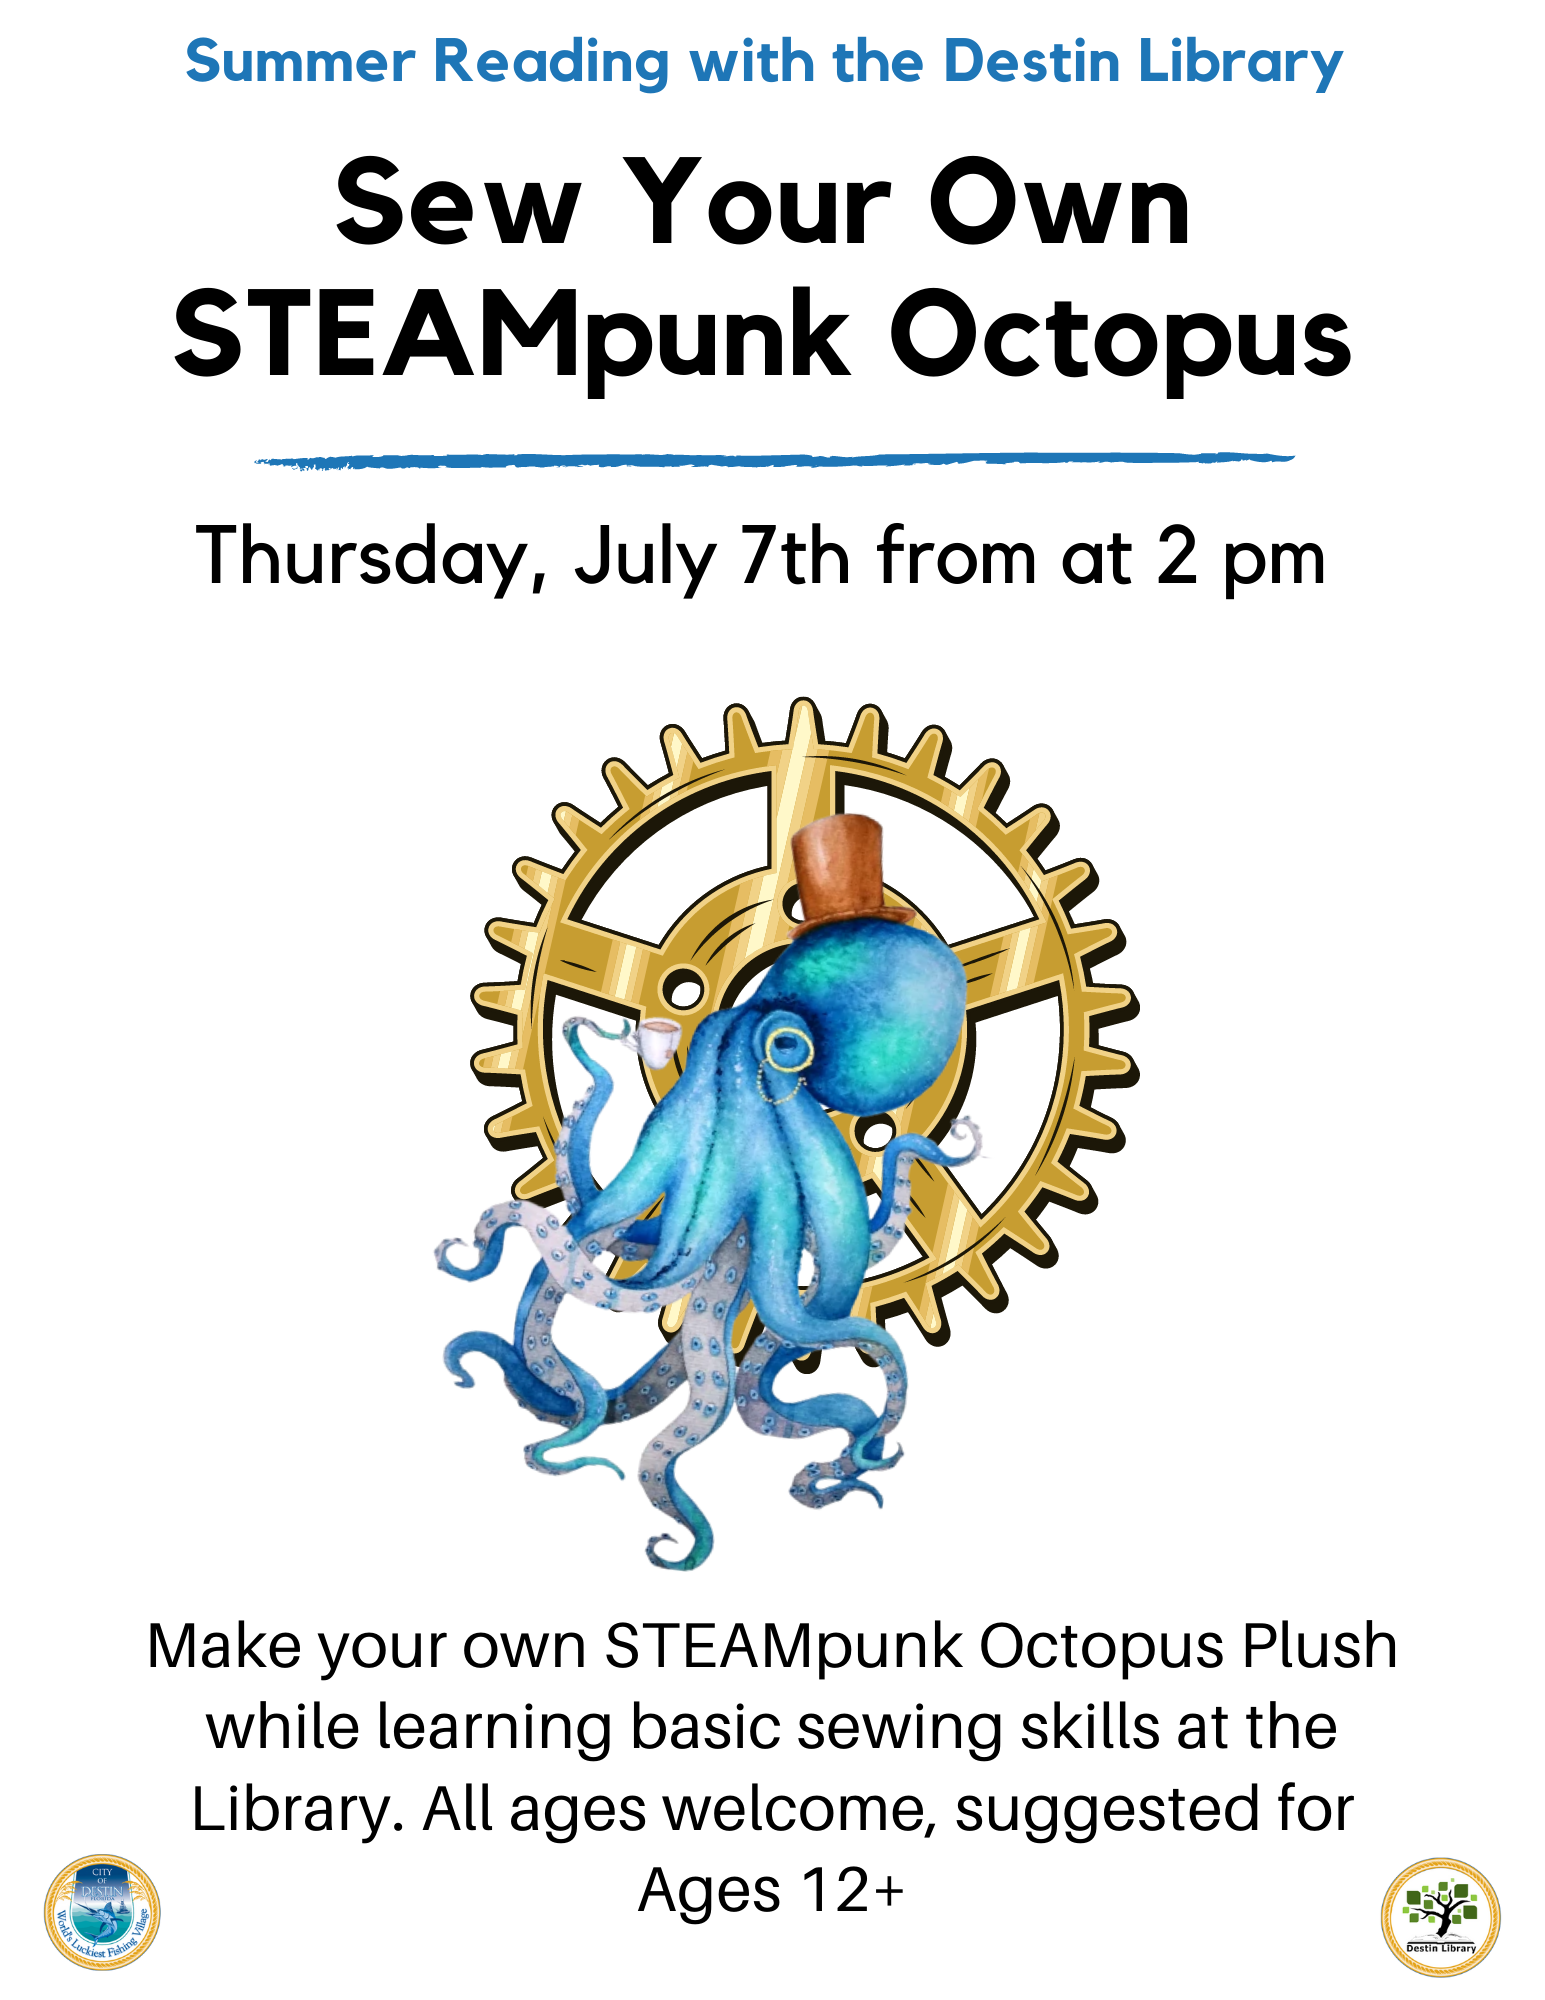 STEAMpunk Octopus Sewing